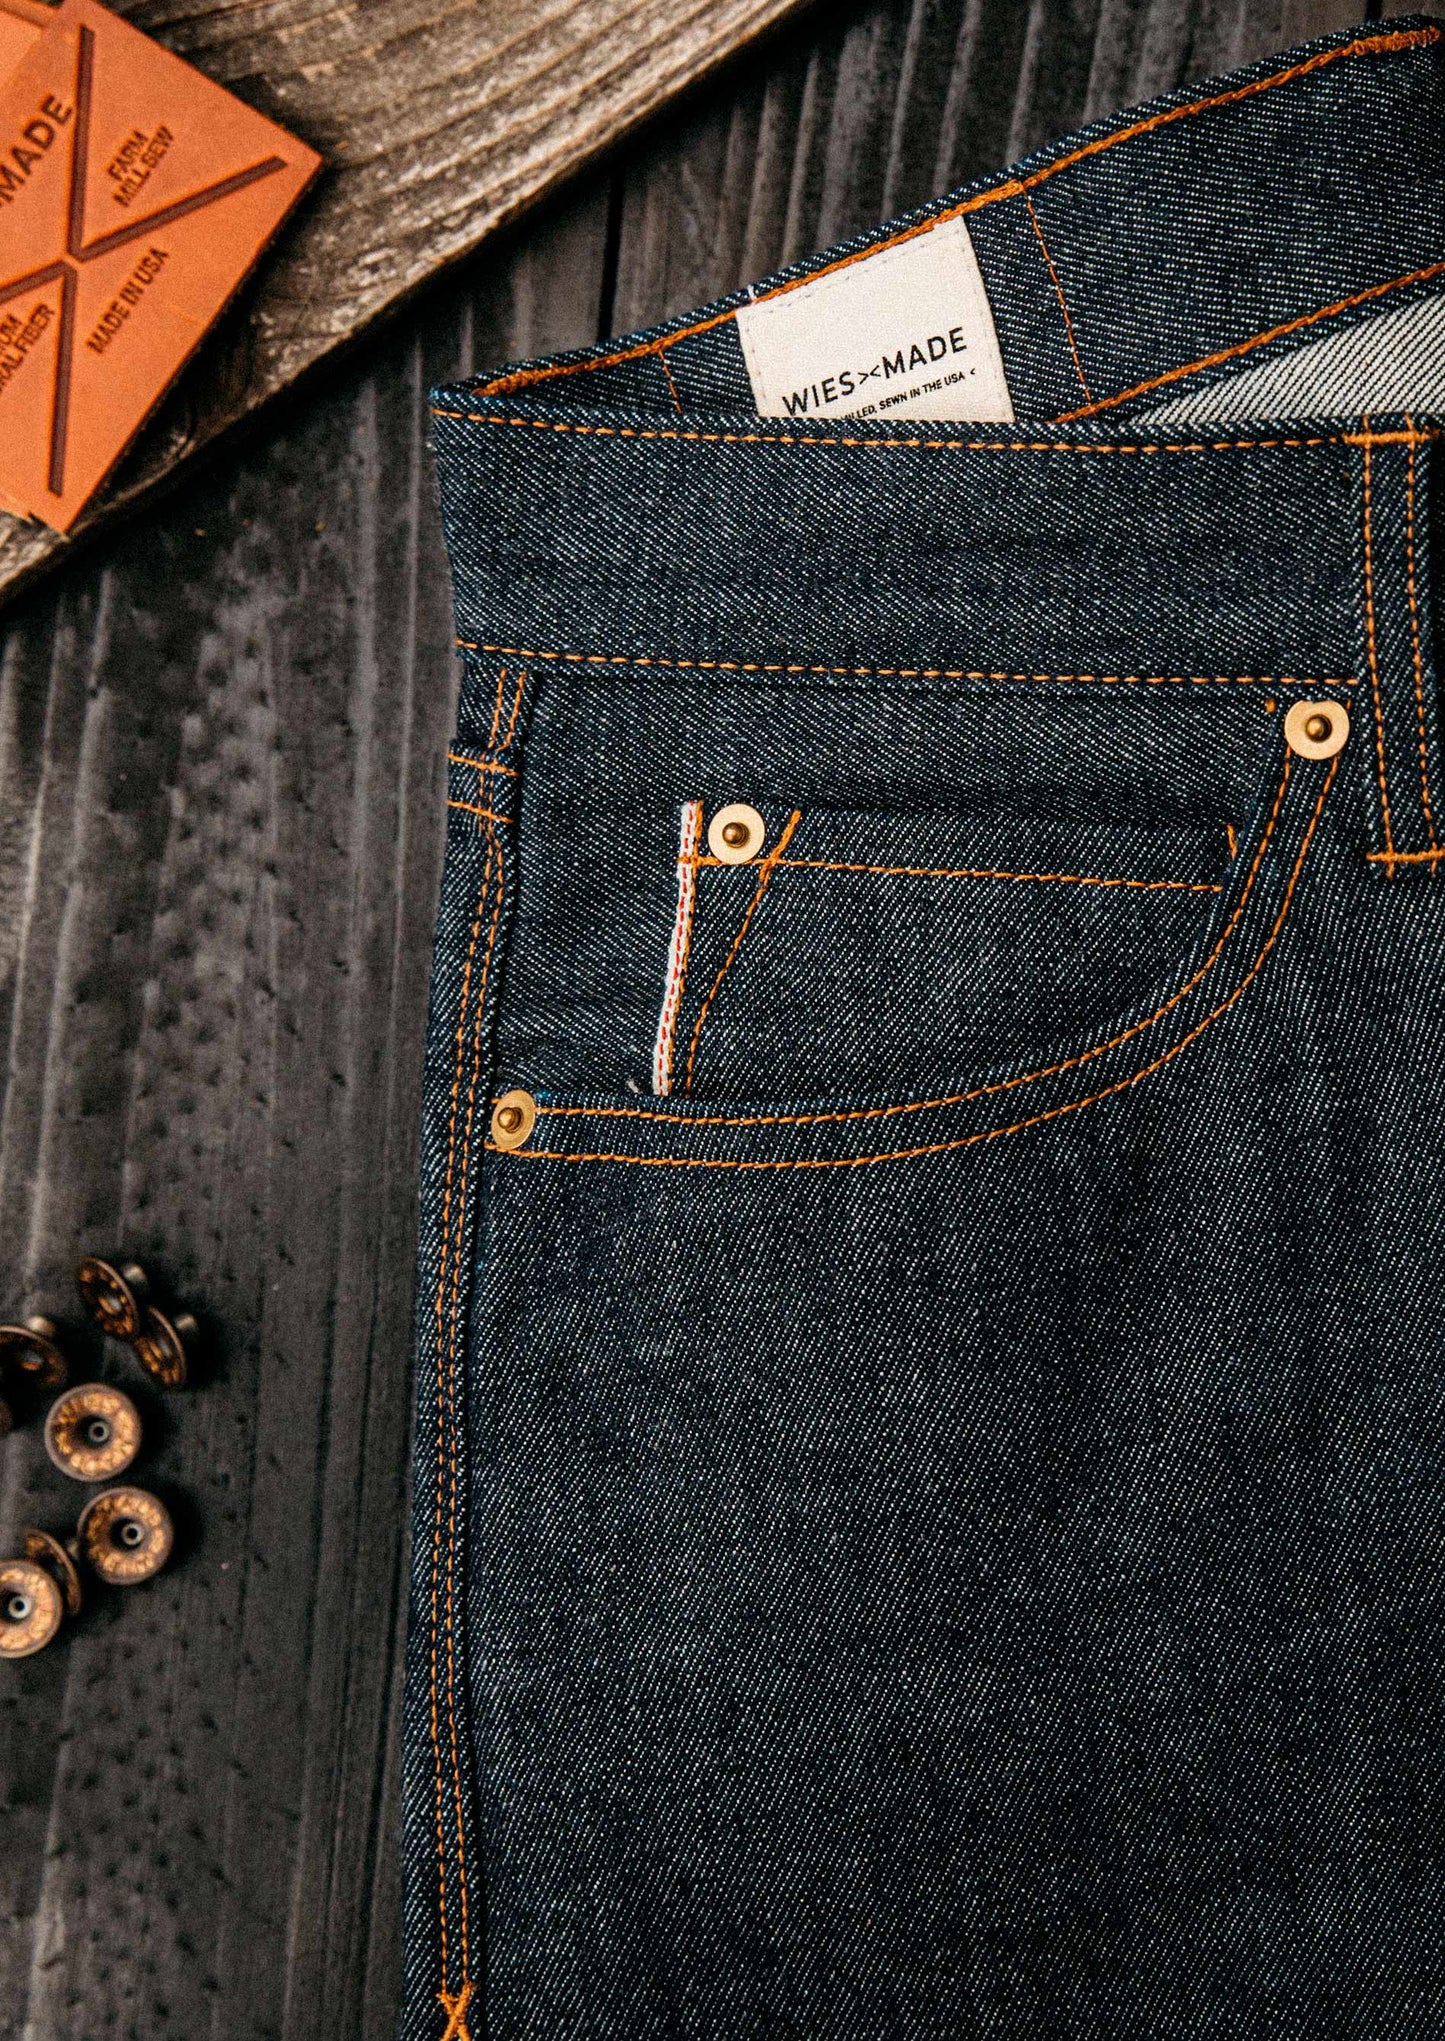 close up photo of denim jeans and loose buttons next to it